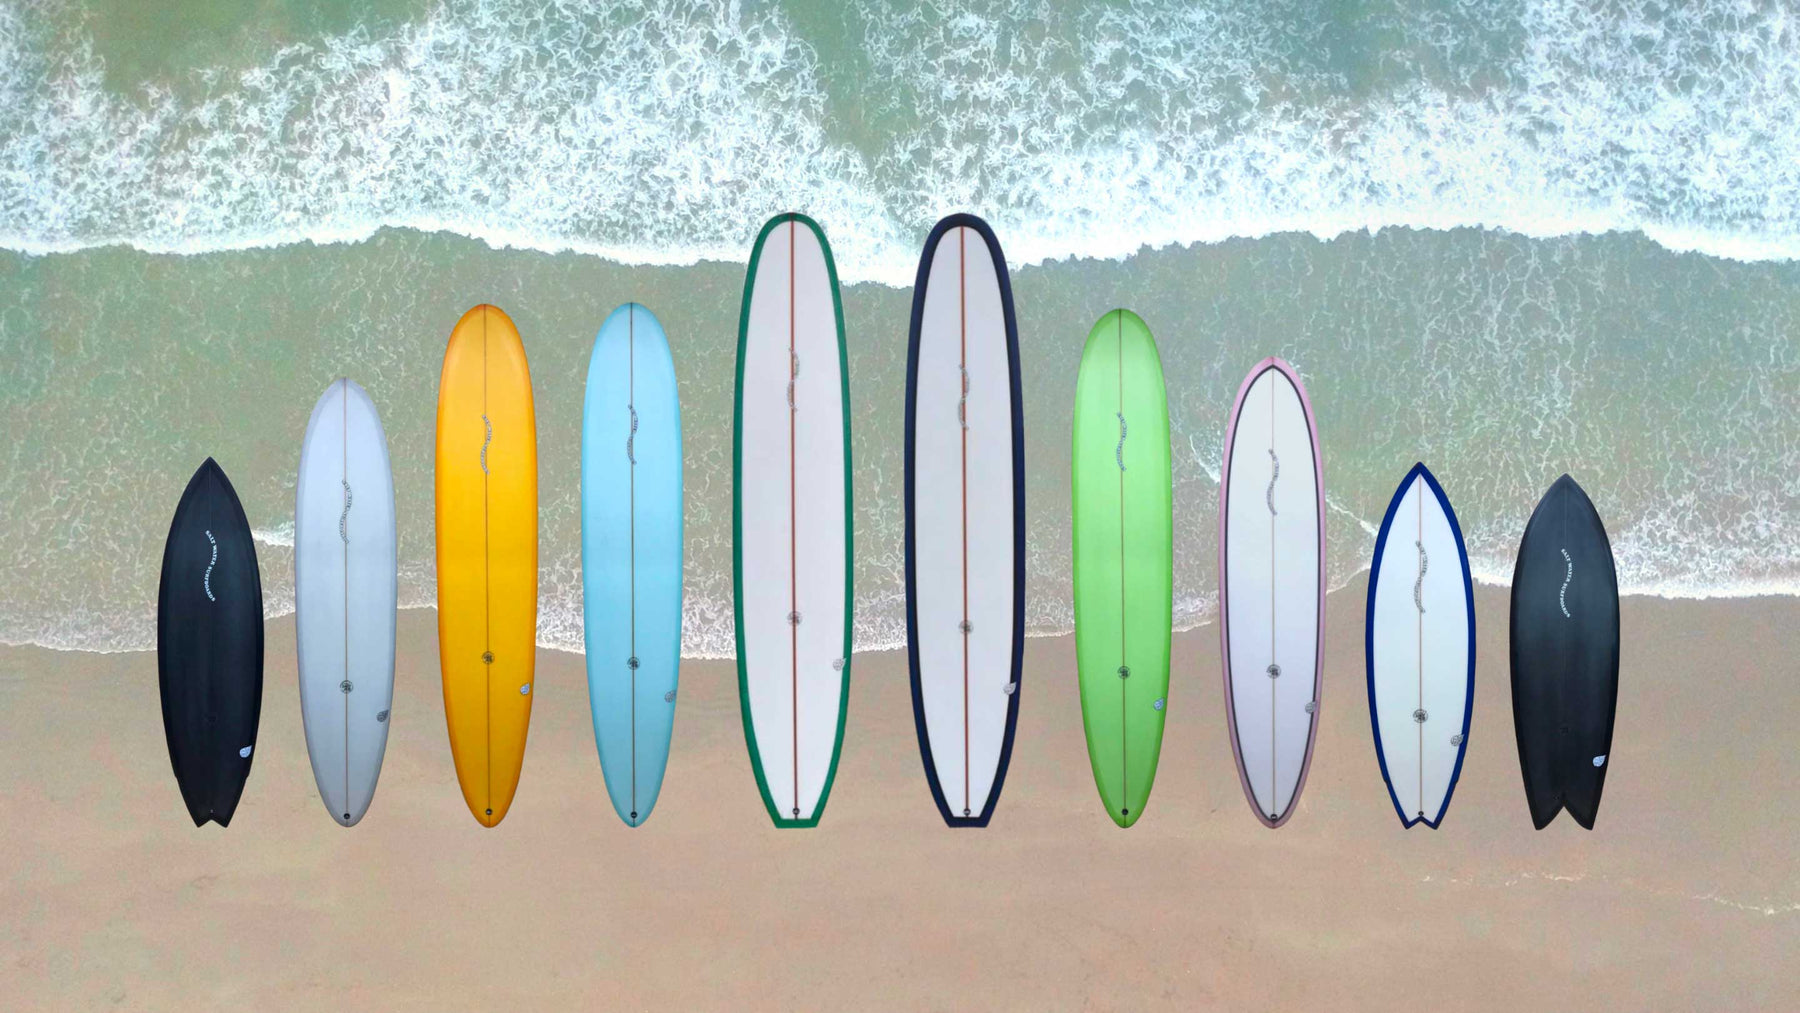 The image shows a collection of 10 Saltwater Surfboards out of the 40th anniversary edition. Part of this collection are short and longboards in different colors.